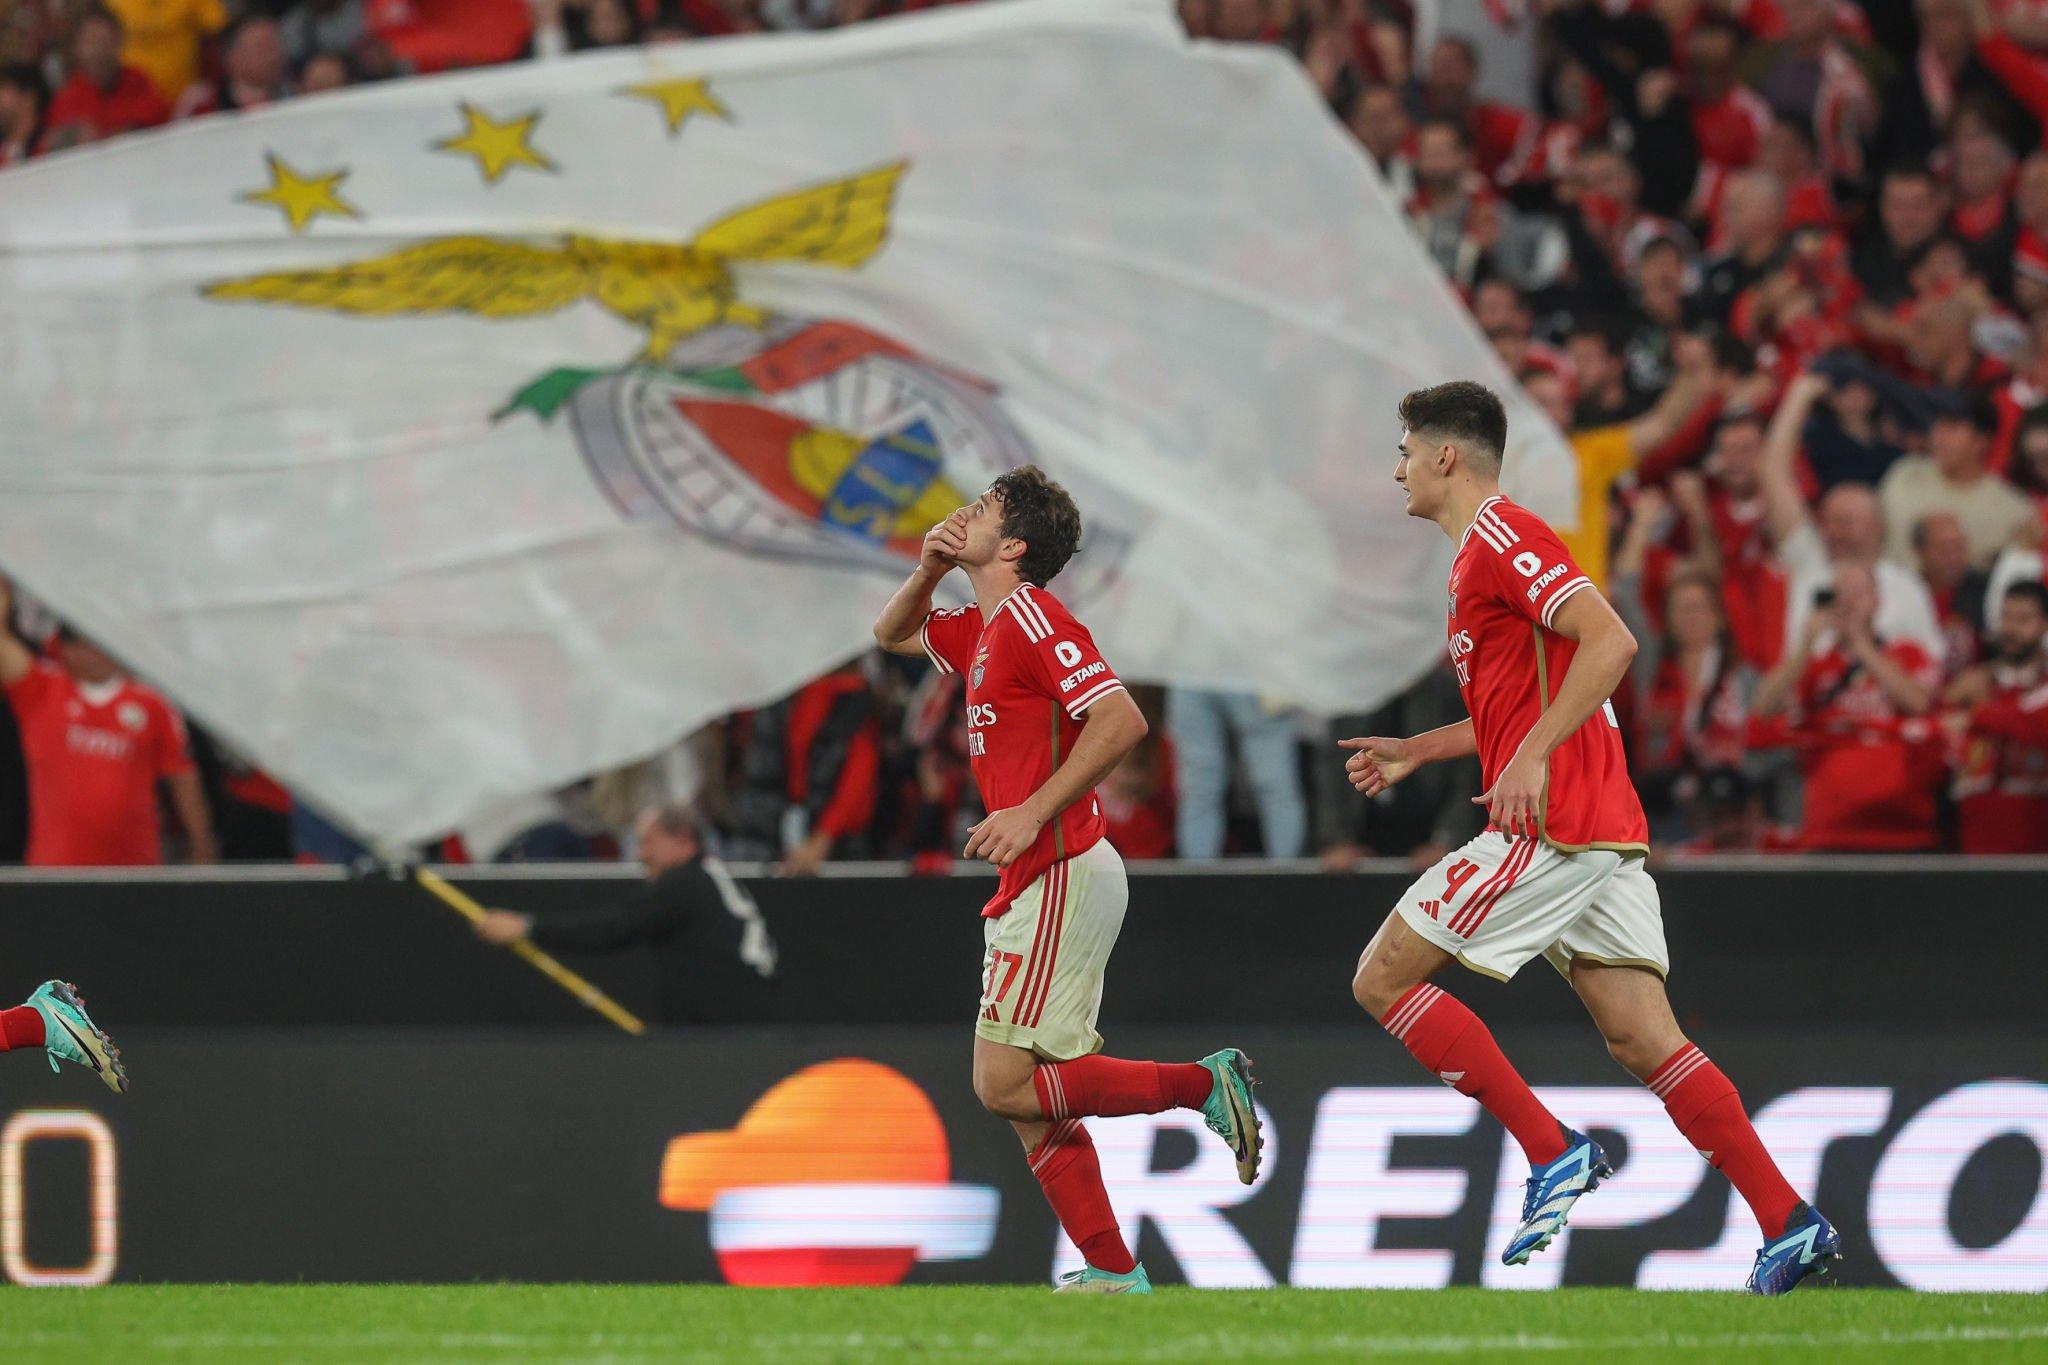 Benfica climb top after late win over Sporting